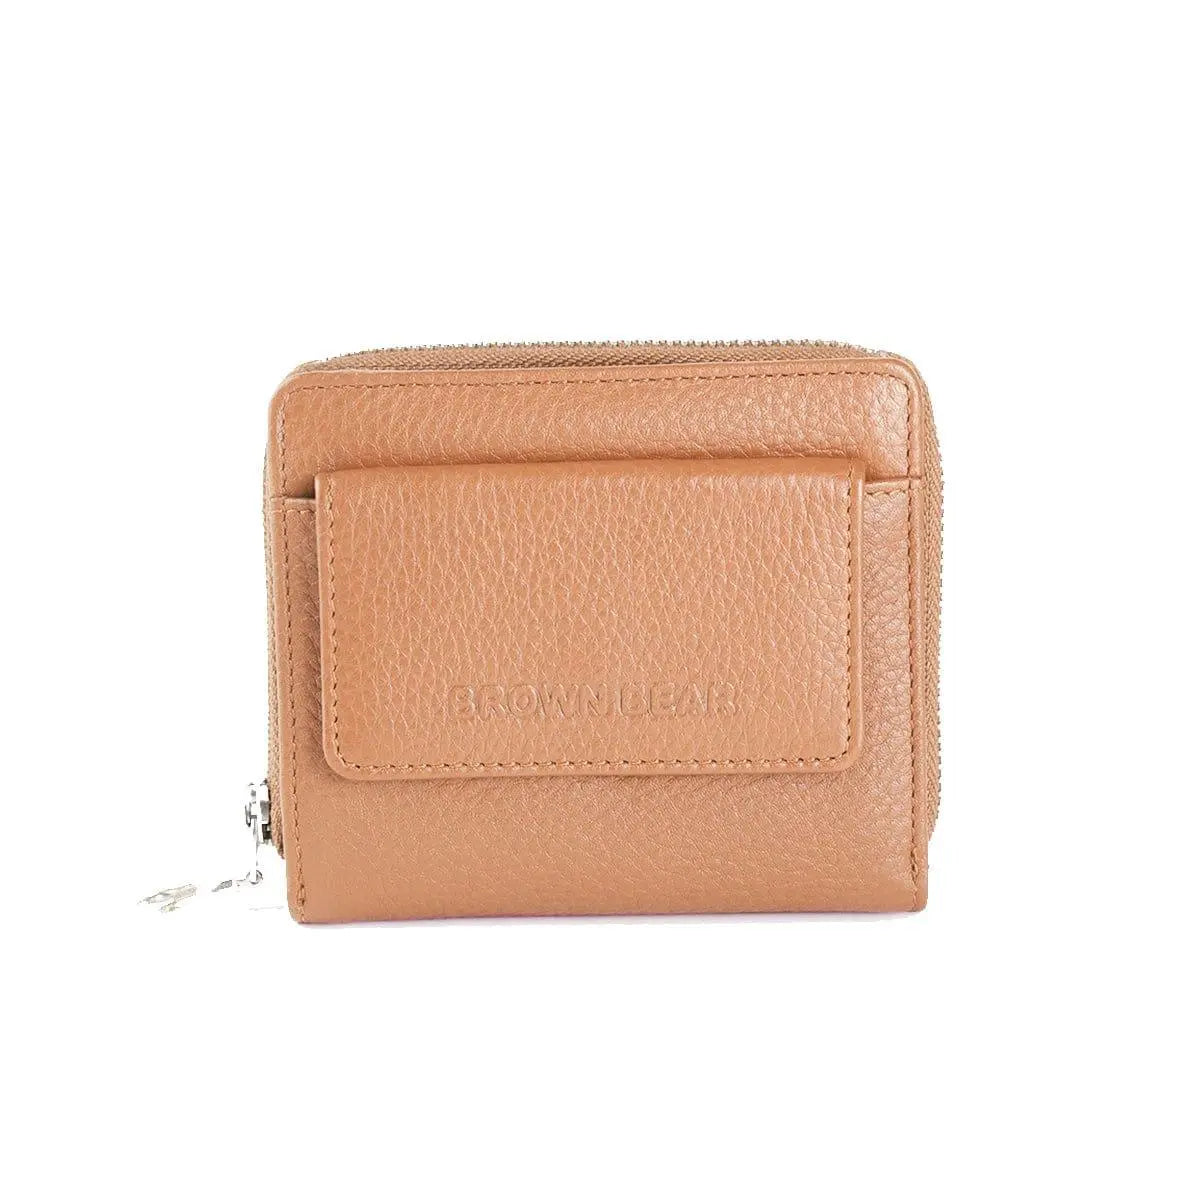 Concealed Pocket Leather Purse with Rivet Trim #P2187RGK - Jamin Leather®